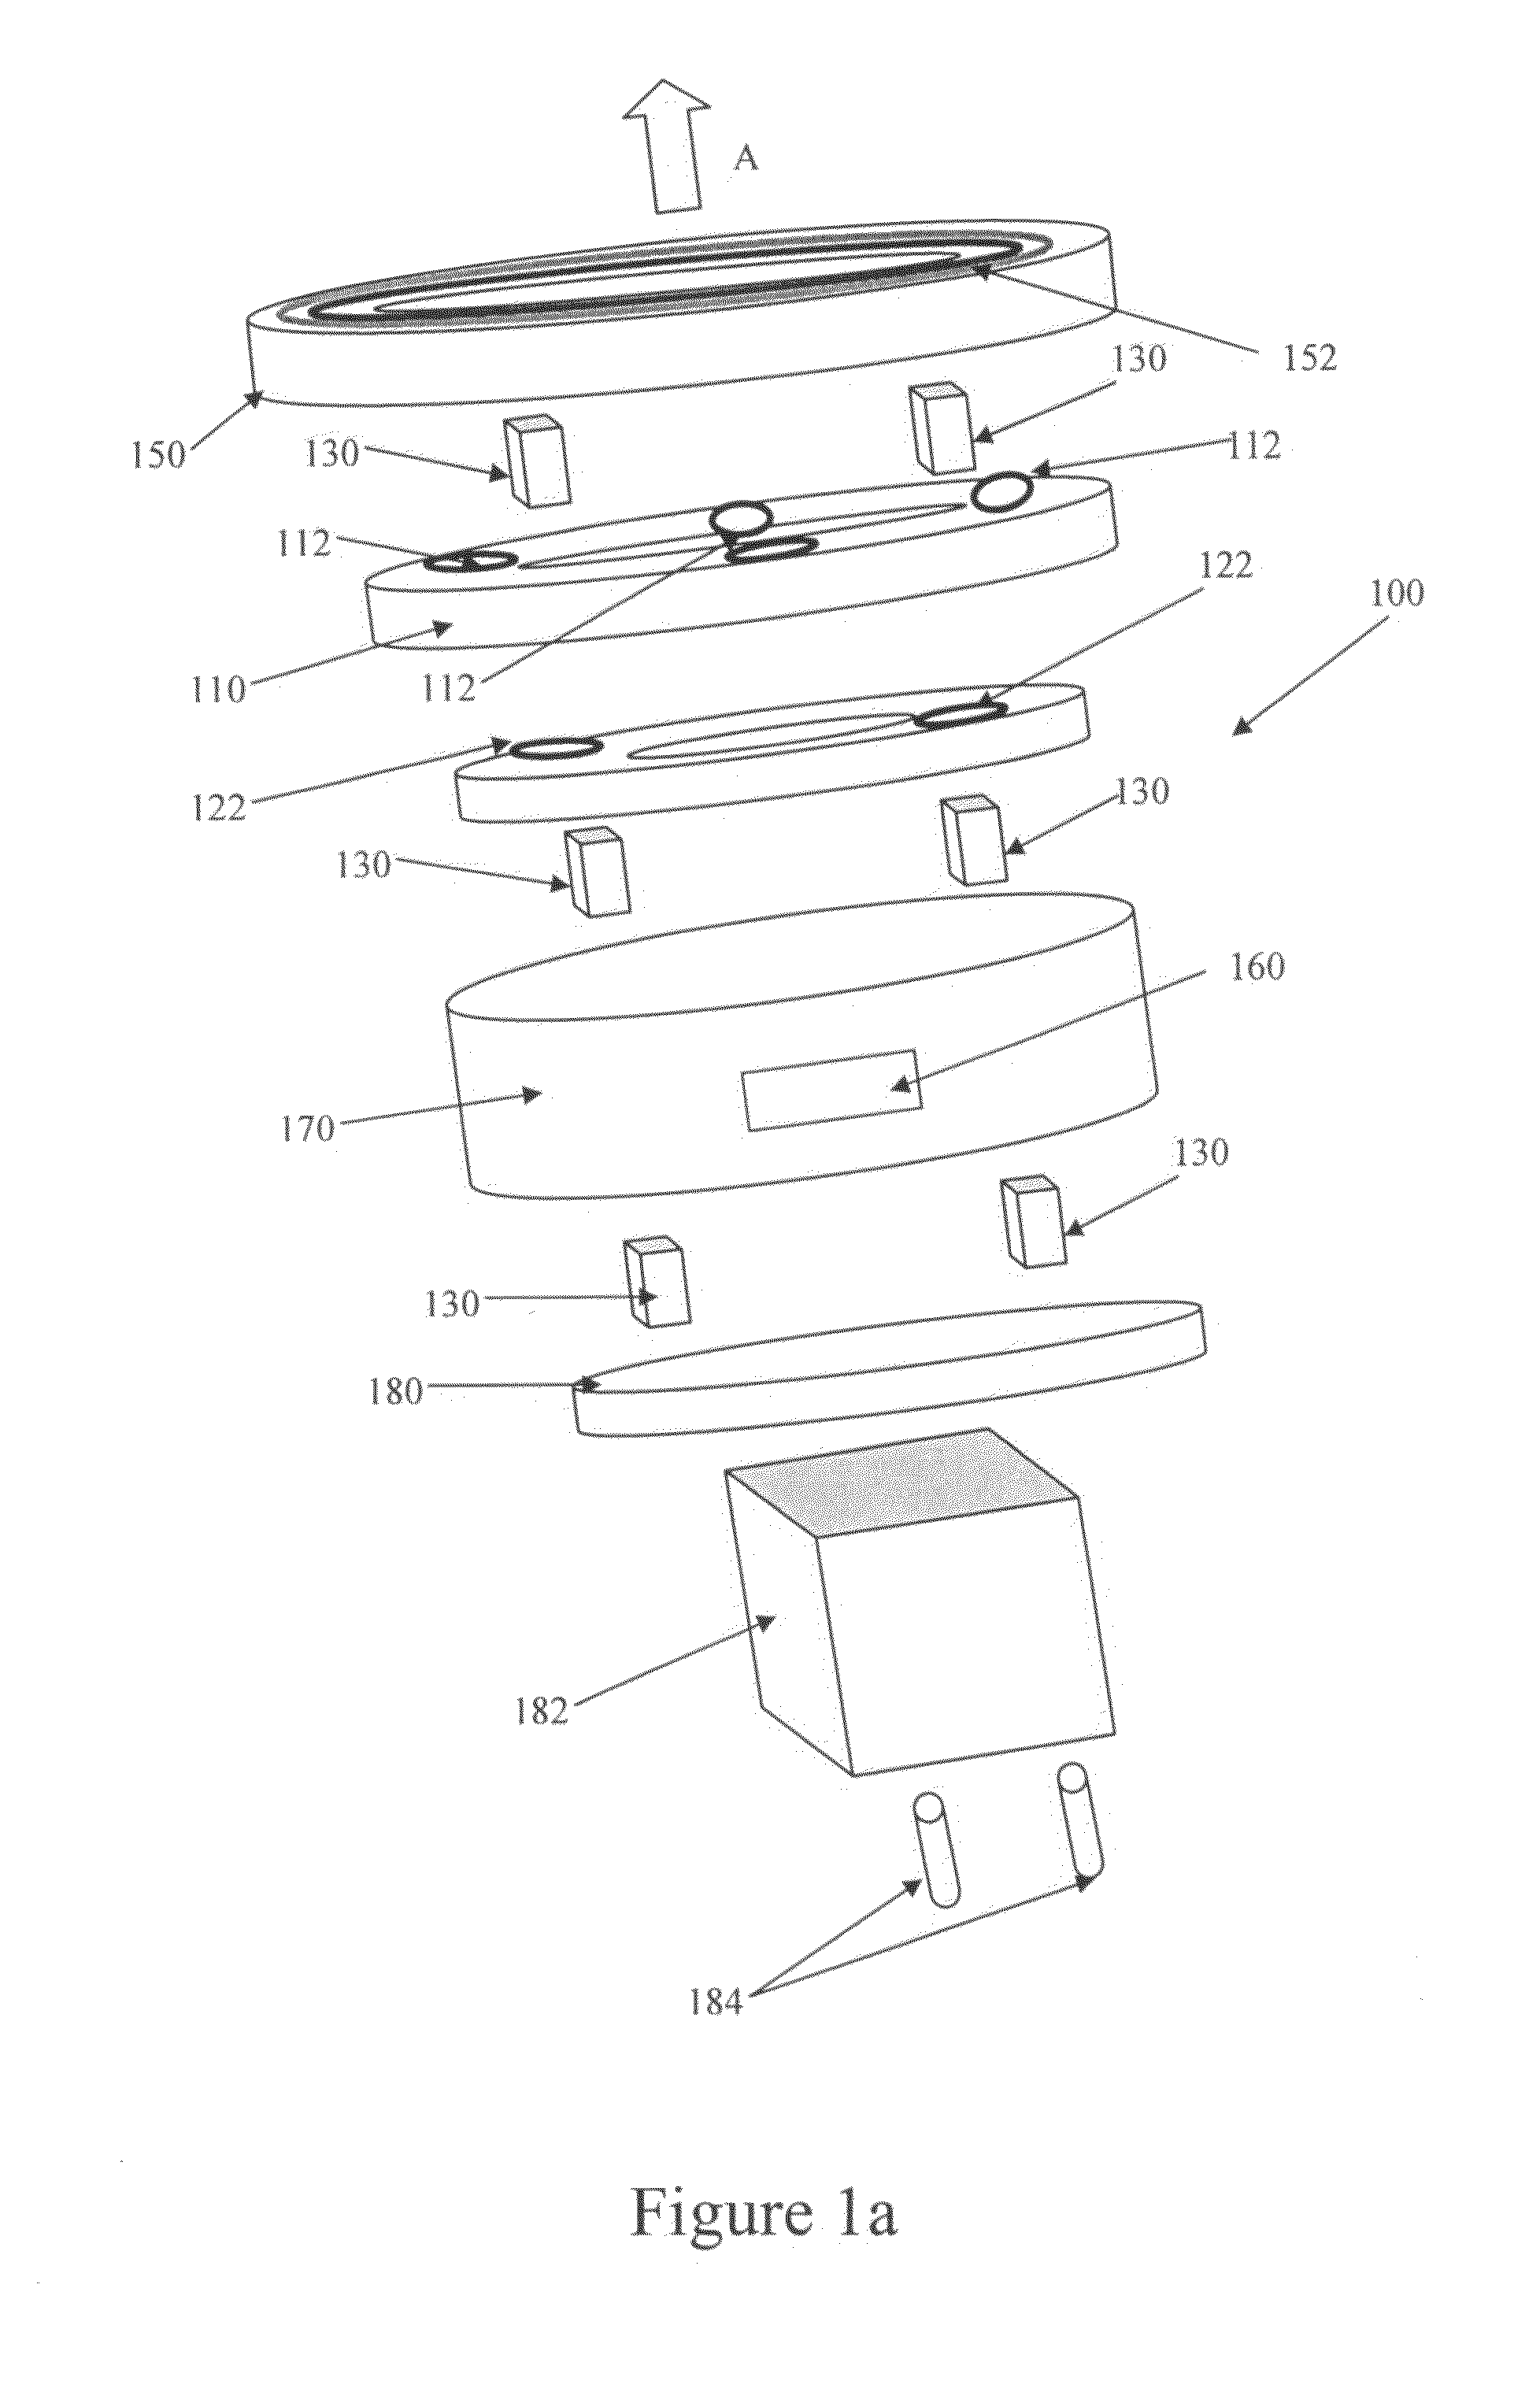 Remote control lighting assembly and use thereof